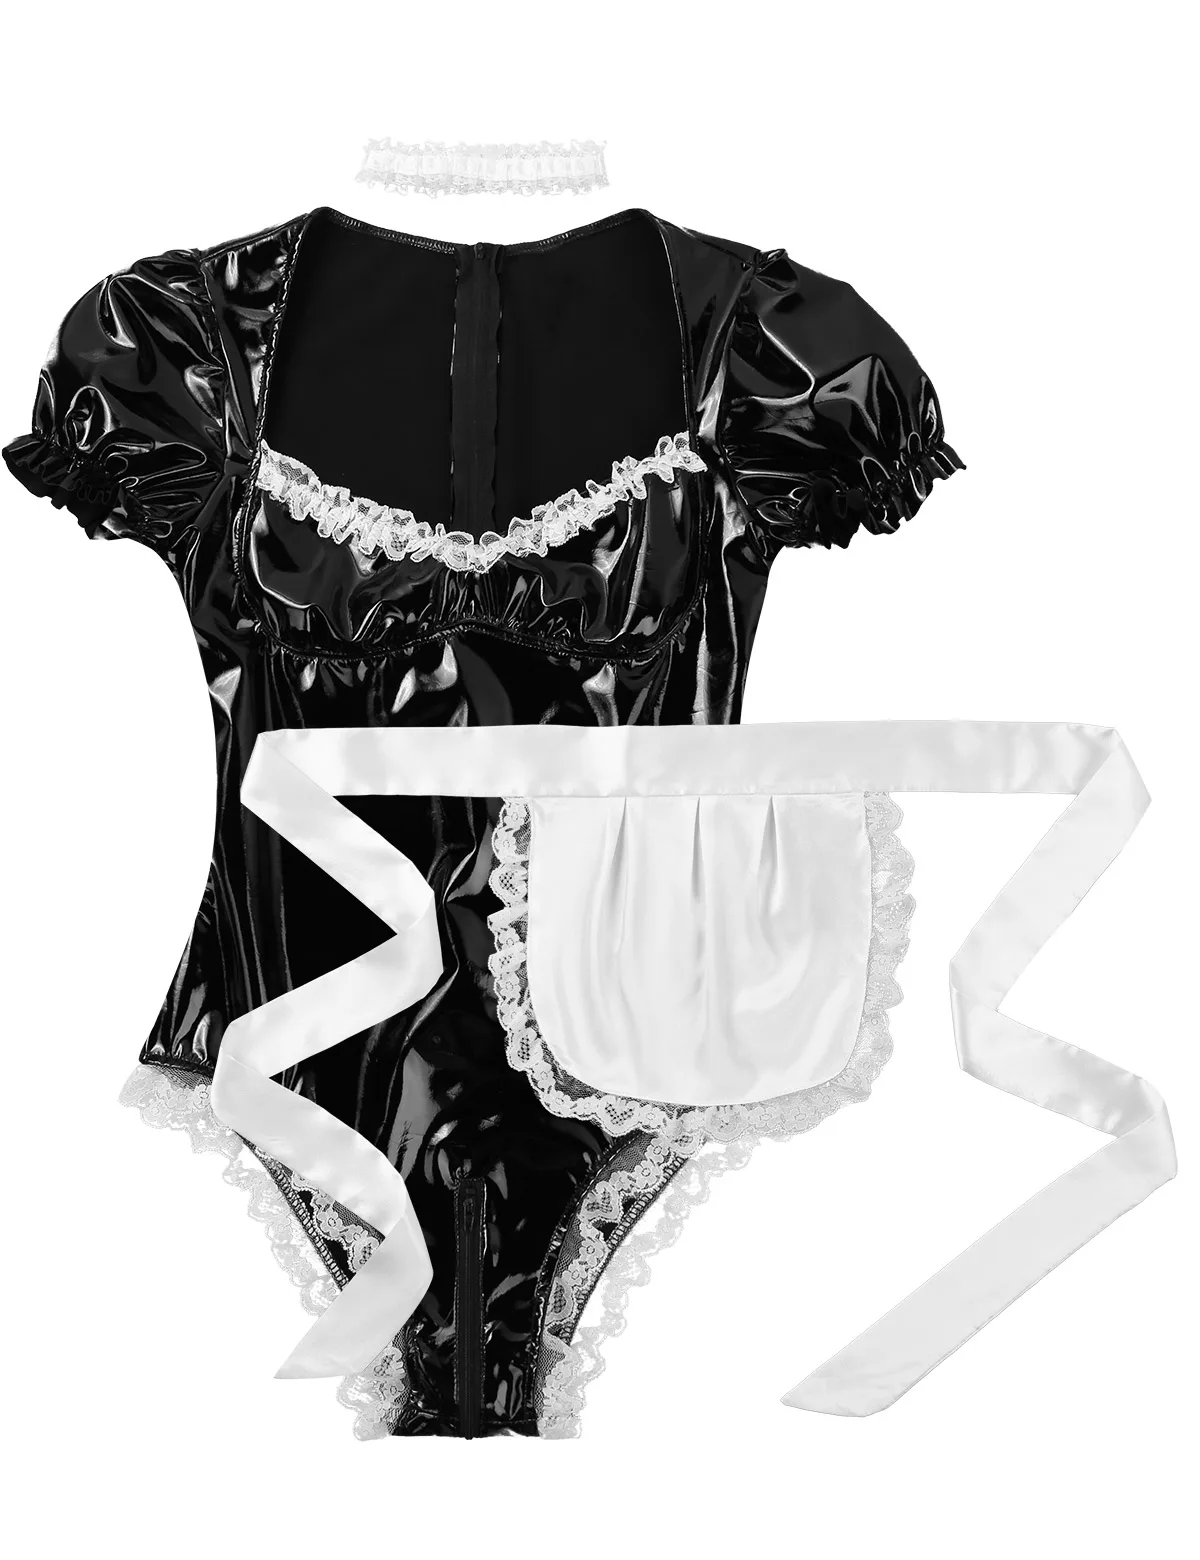 Women's French Maid Cosplay Halloween Costumes Outfit Leather Bodysuit with Choker and Apron Sissy Maid Role Play Game Clothing